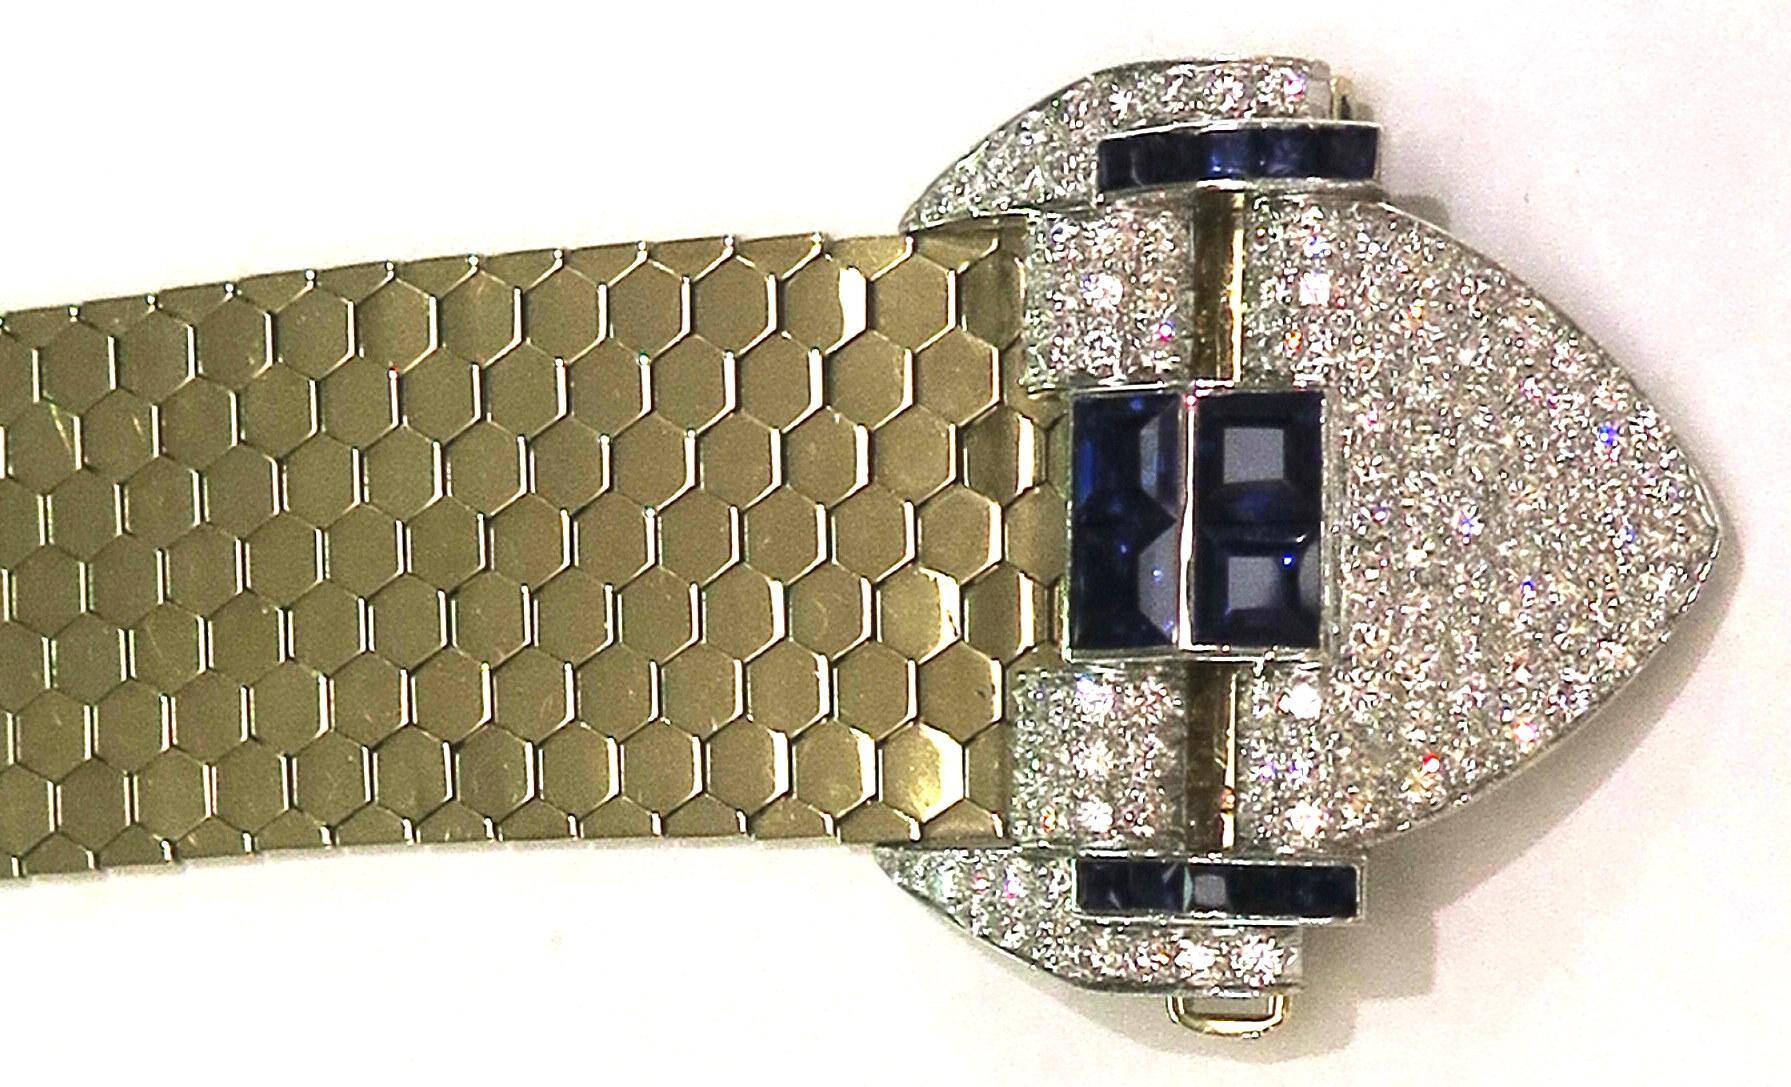 This stunning 18 Karat yellow and white gold retro diamond and sapphire buckle bracelet features a liquid gold flexible hexagonal honeycomb link for superb comfort and wearability. There are approx 3.40 ct diamonds and  approx. 2.70 carats of blue